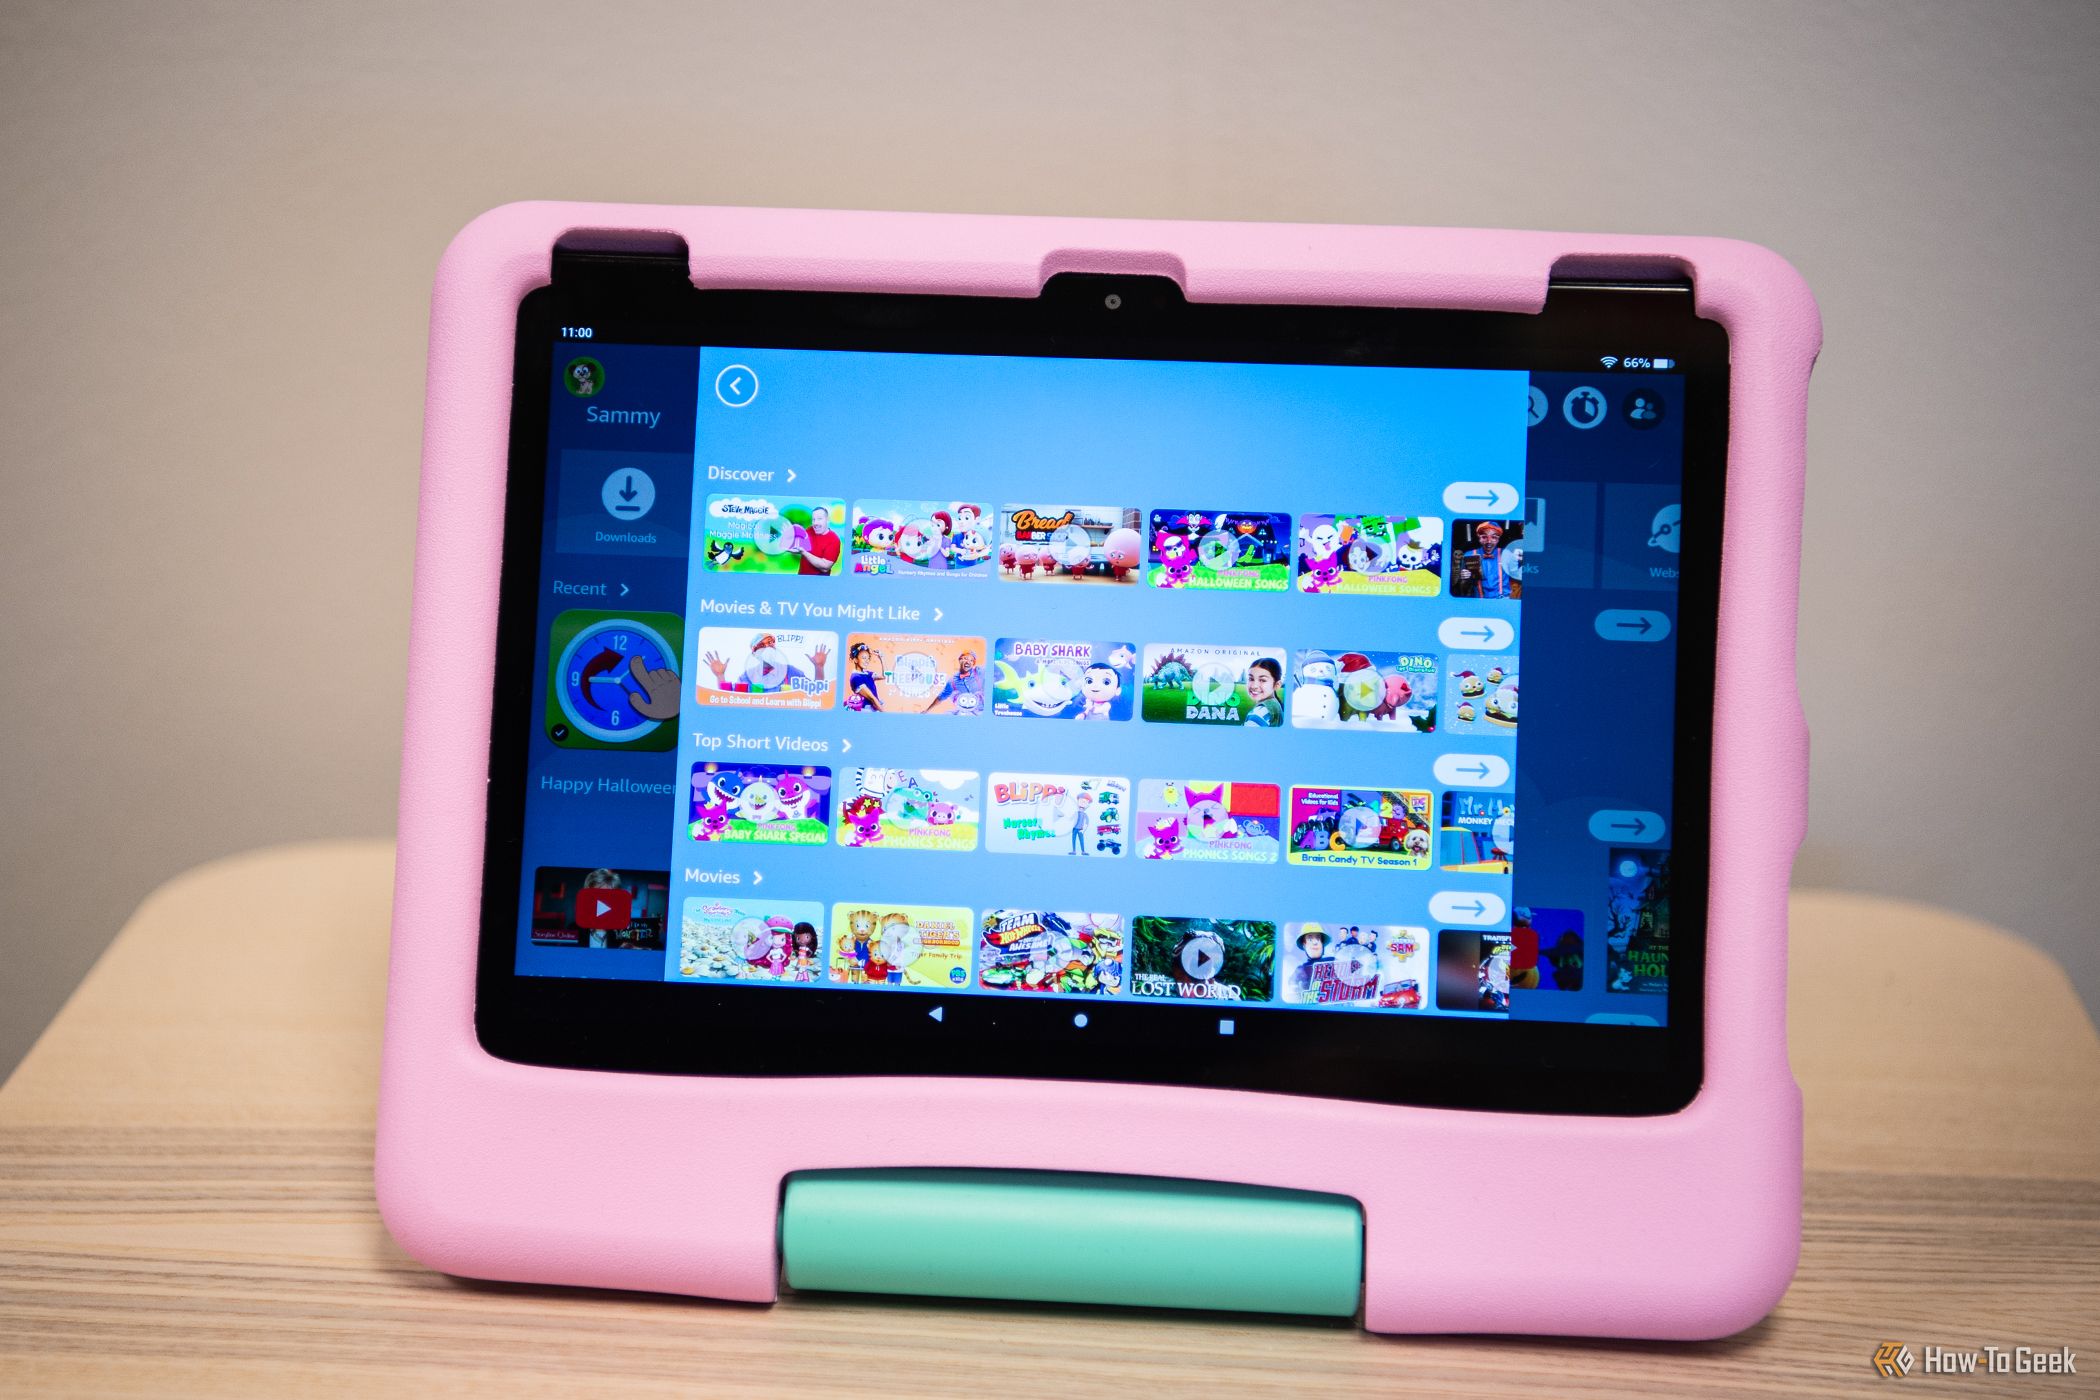 Using parental controls on Kindle Fire tablet